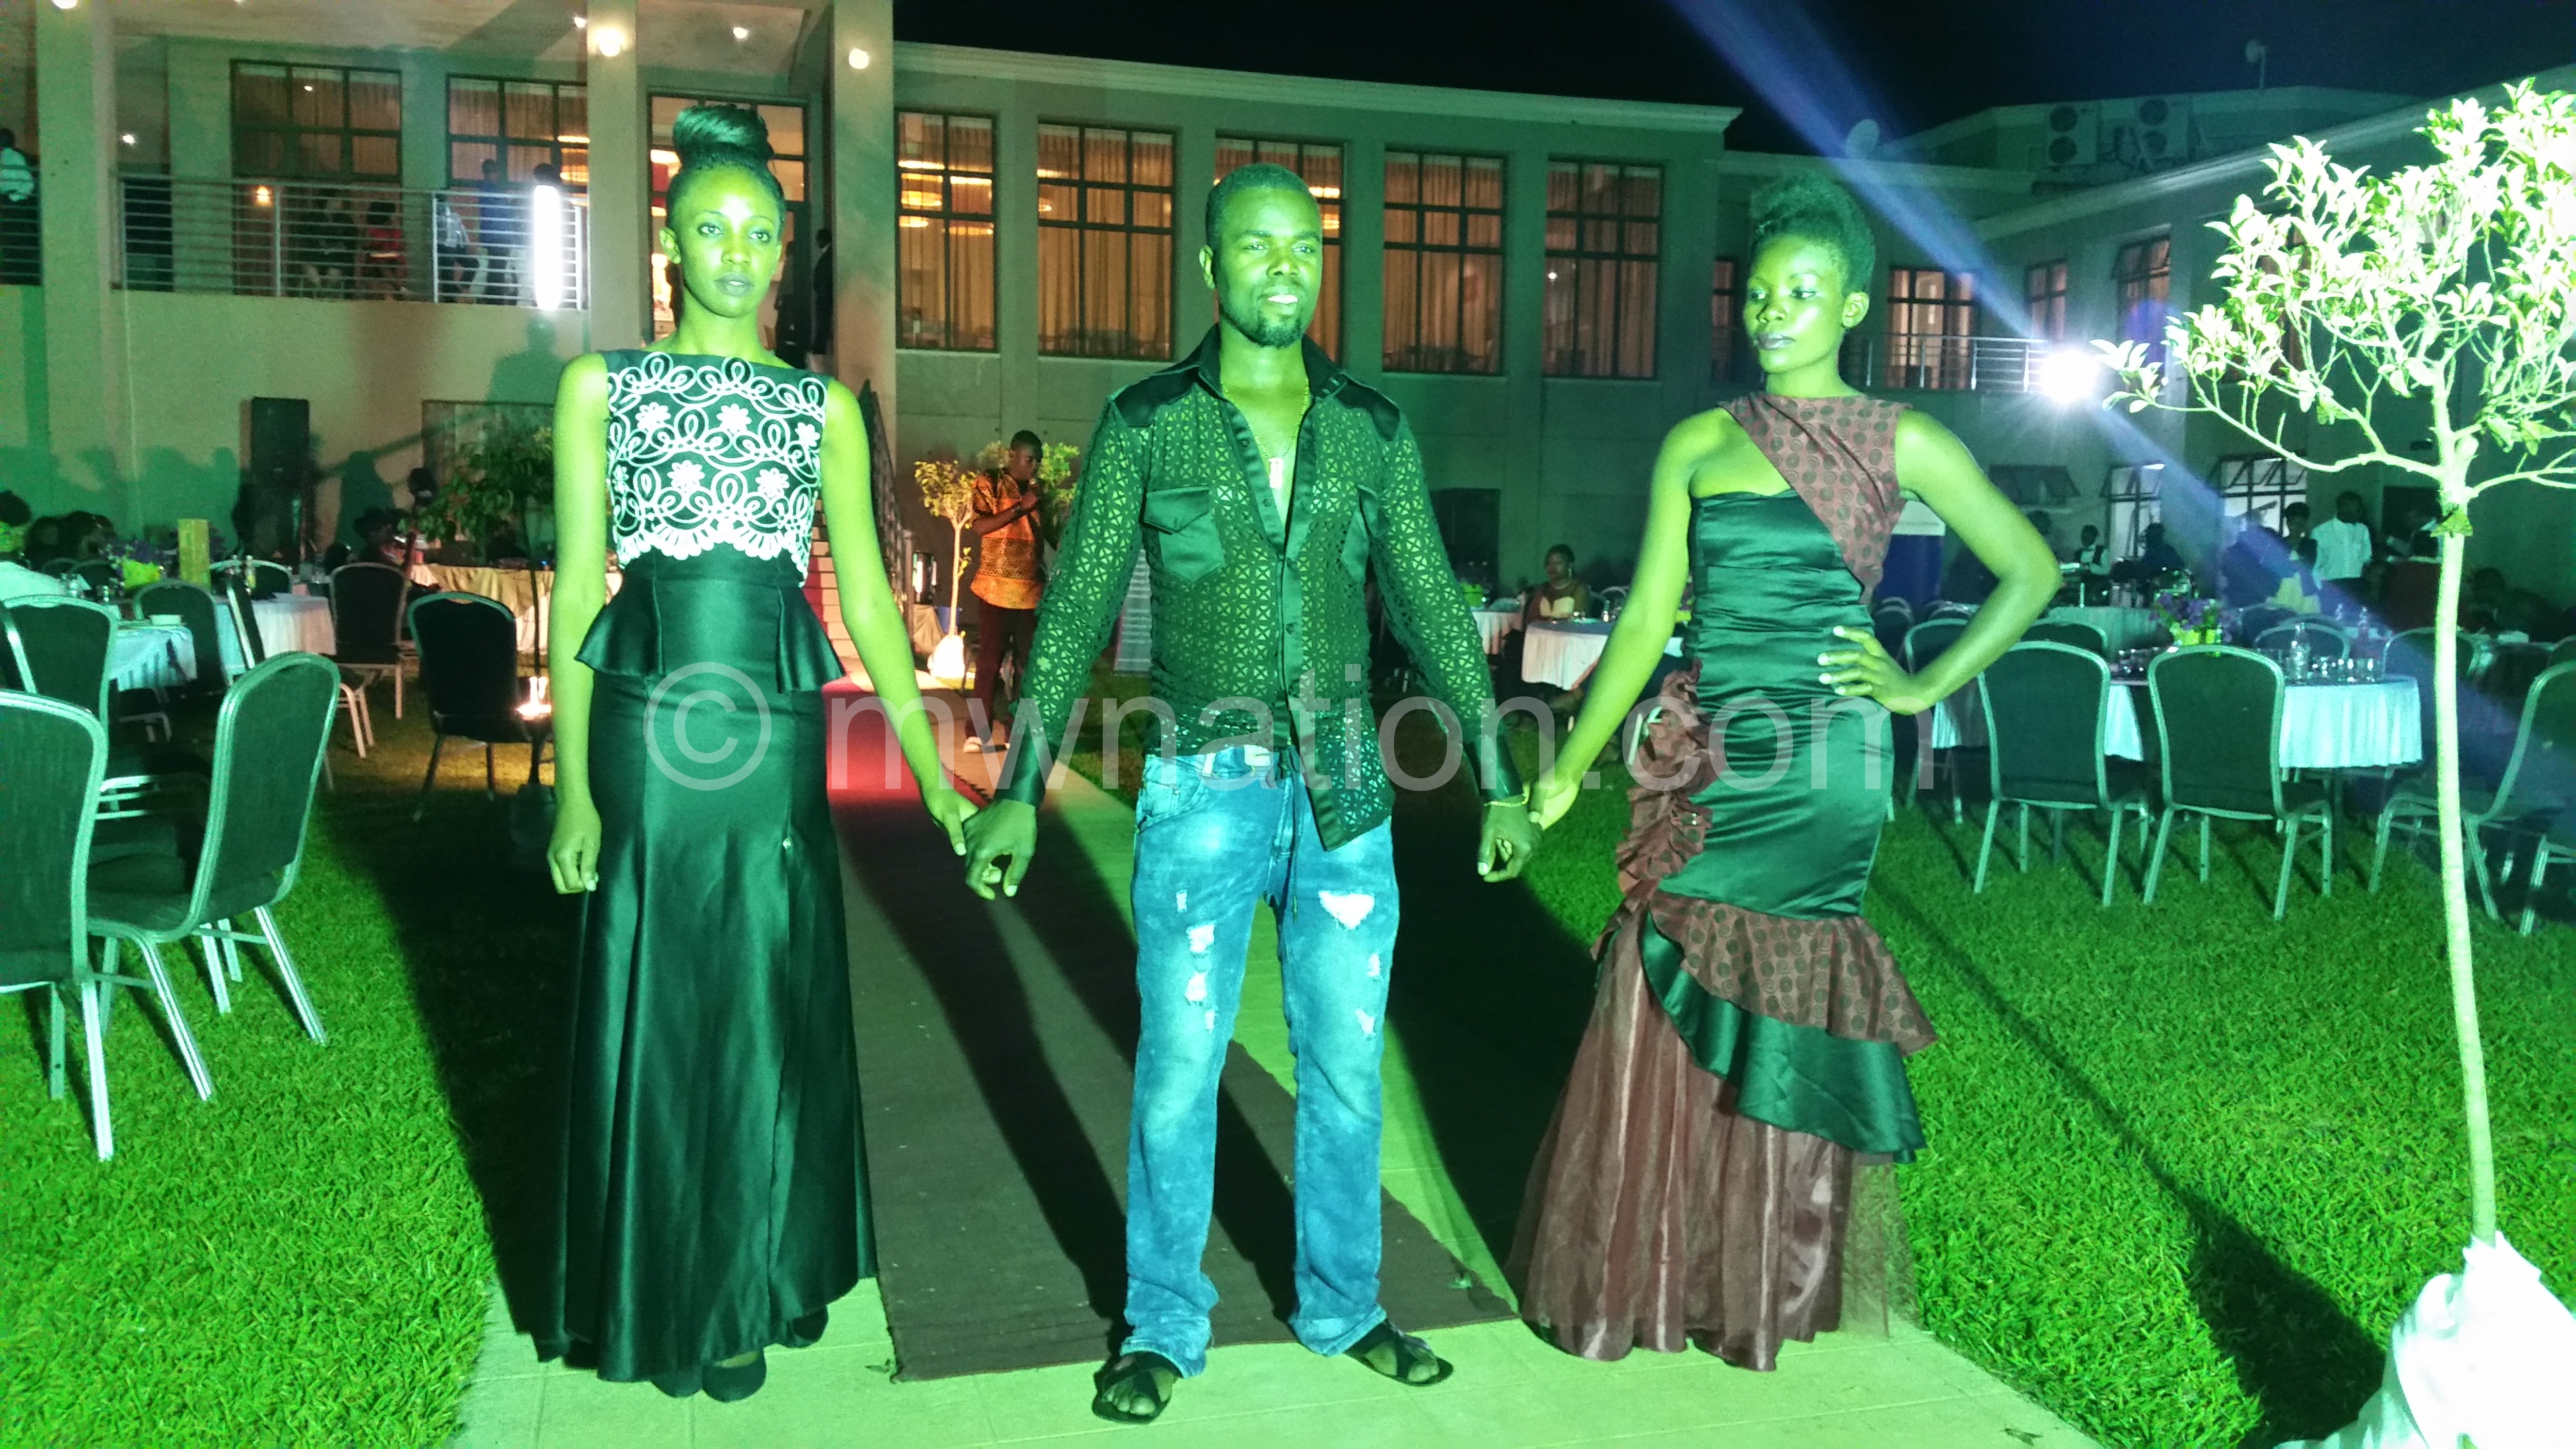 Clemoh Sato (C) poses with models wearing his designs at the Mzuzu Fashion Week